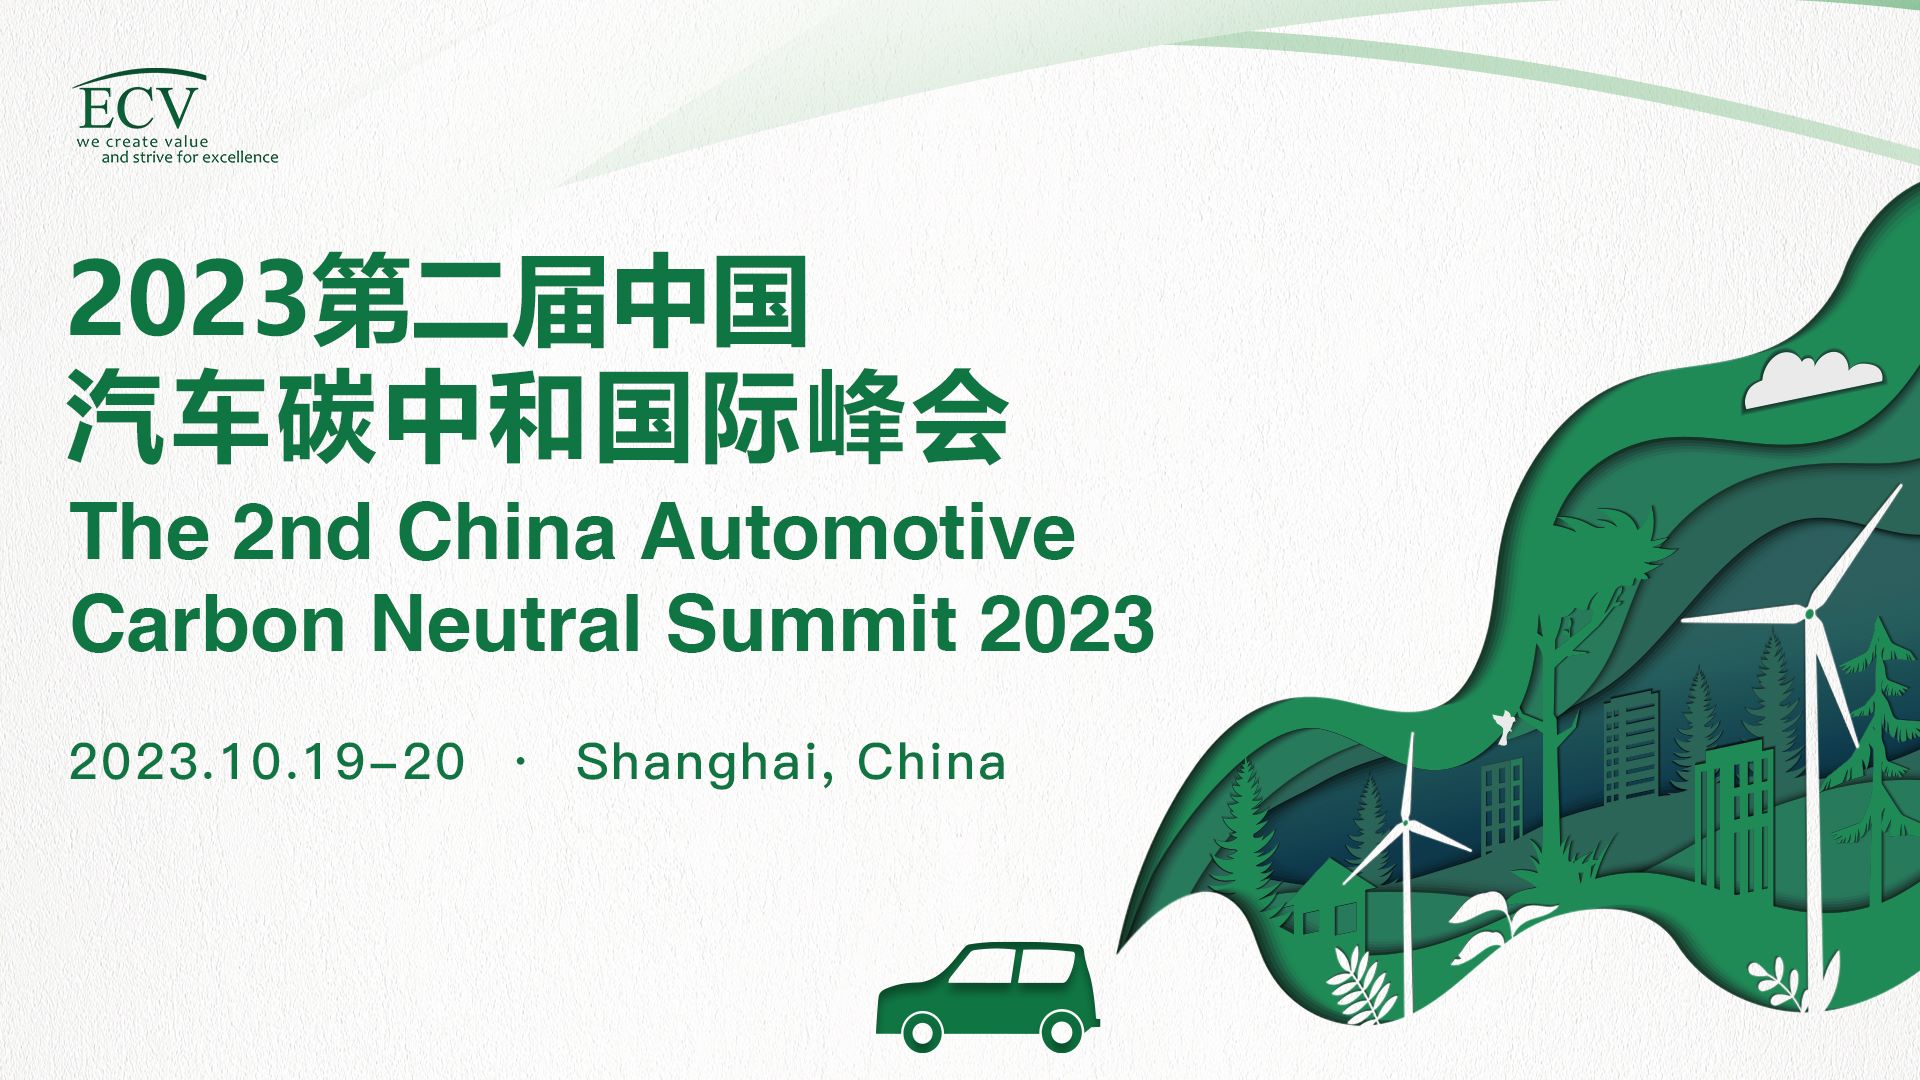 The 2nd China Automotive Carbon Neutral Summit 2023, Shanghai, China